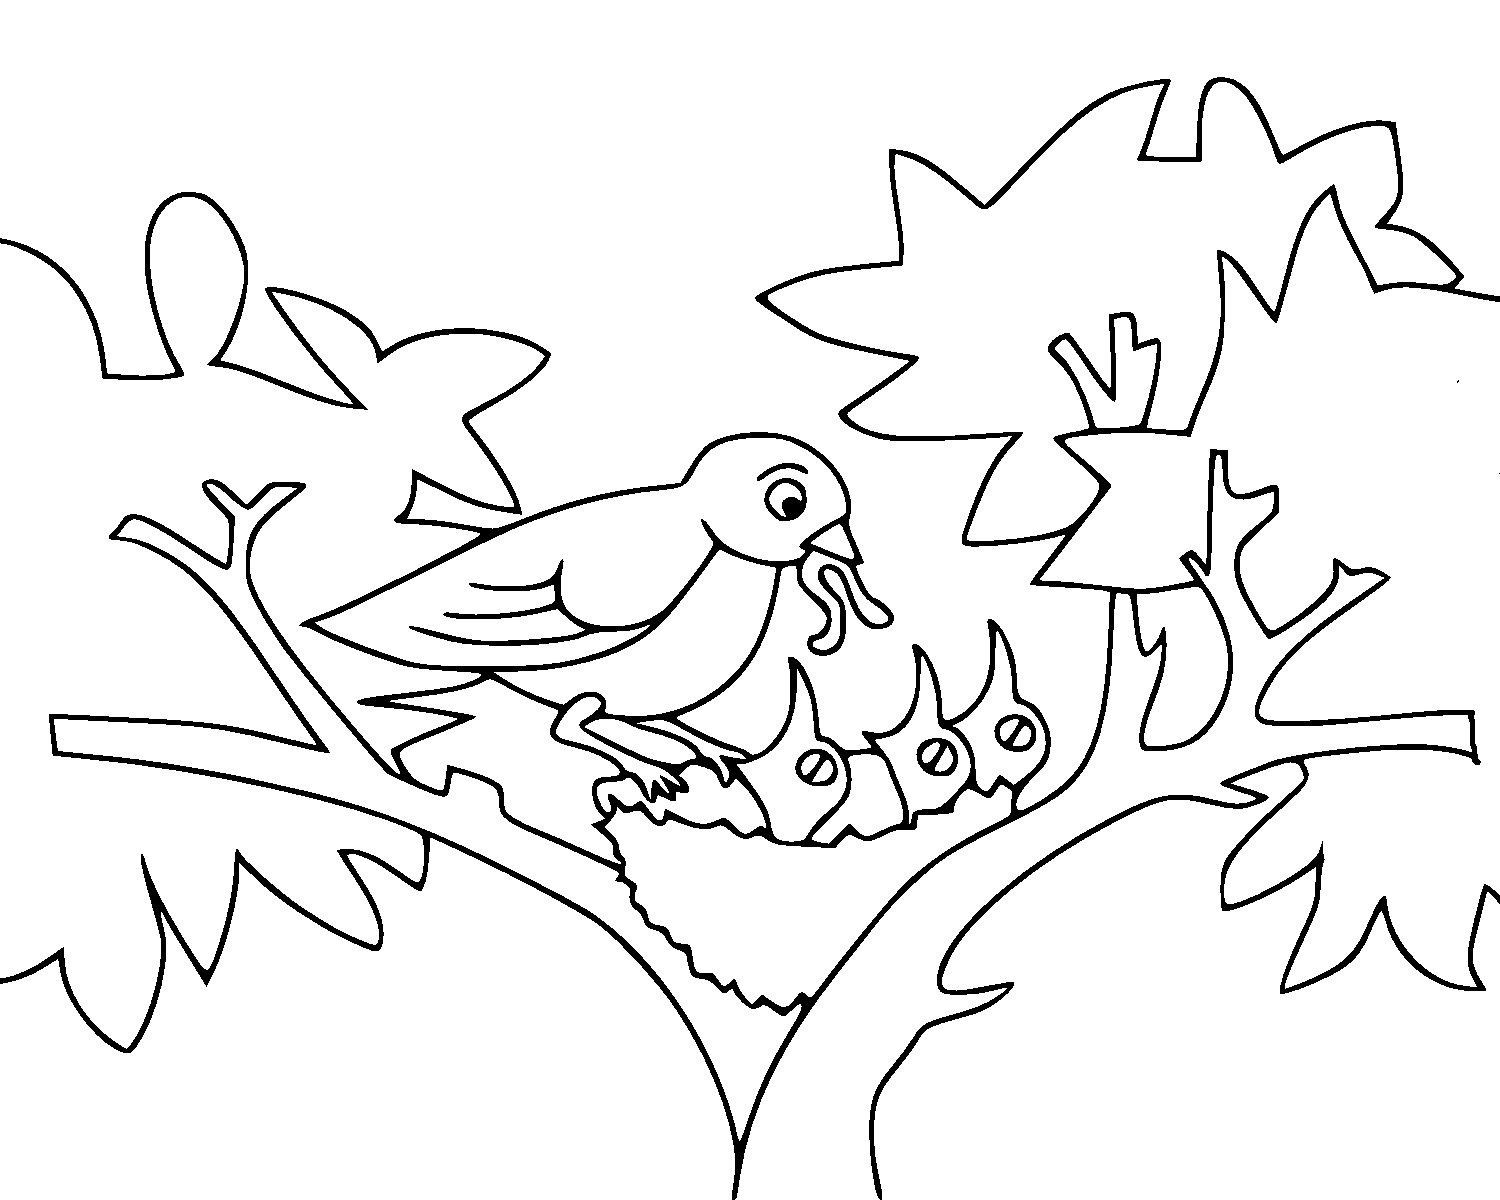 coloring pages for kids - Coloring Pages Blog